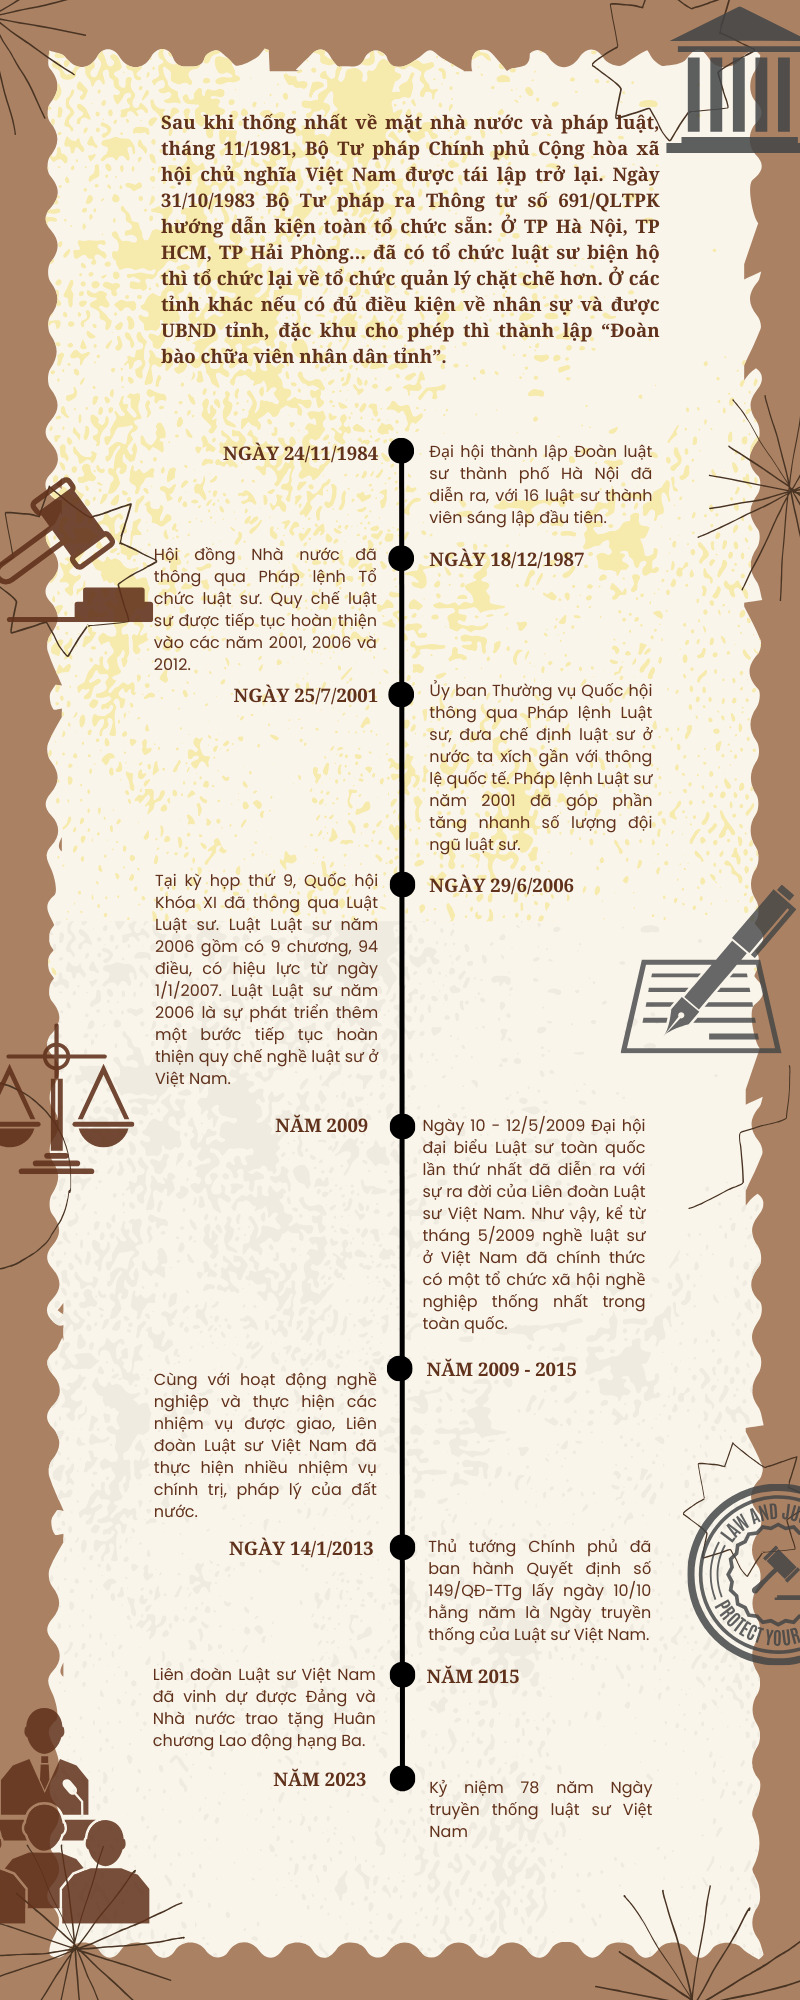 Beige Illustrated Geography and History Infographic (2)